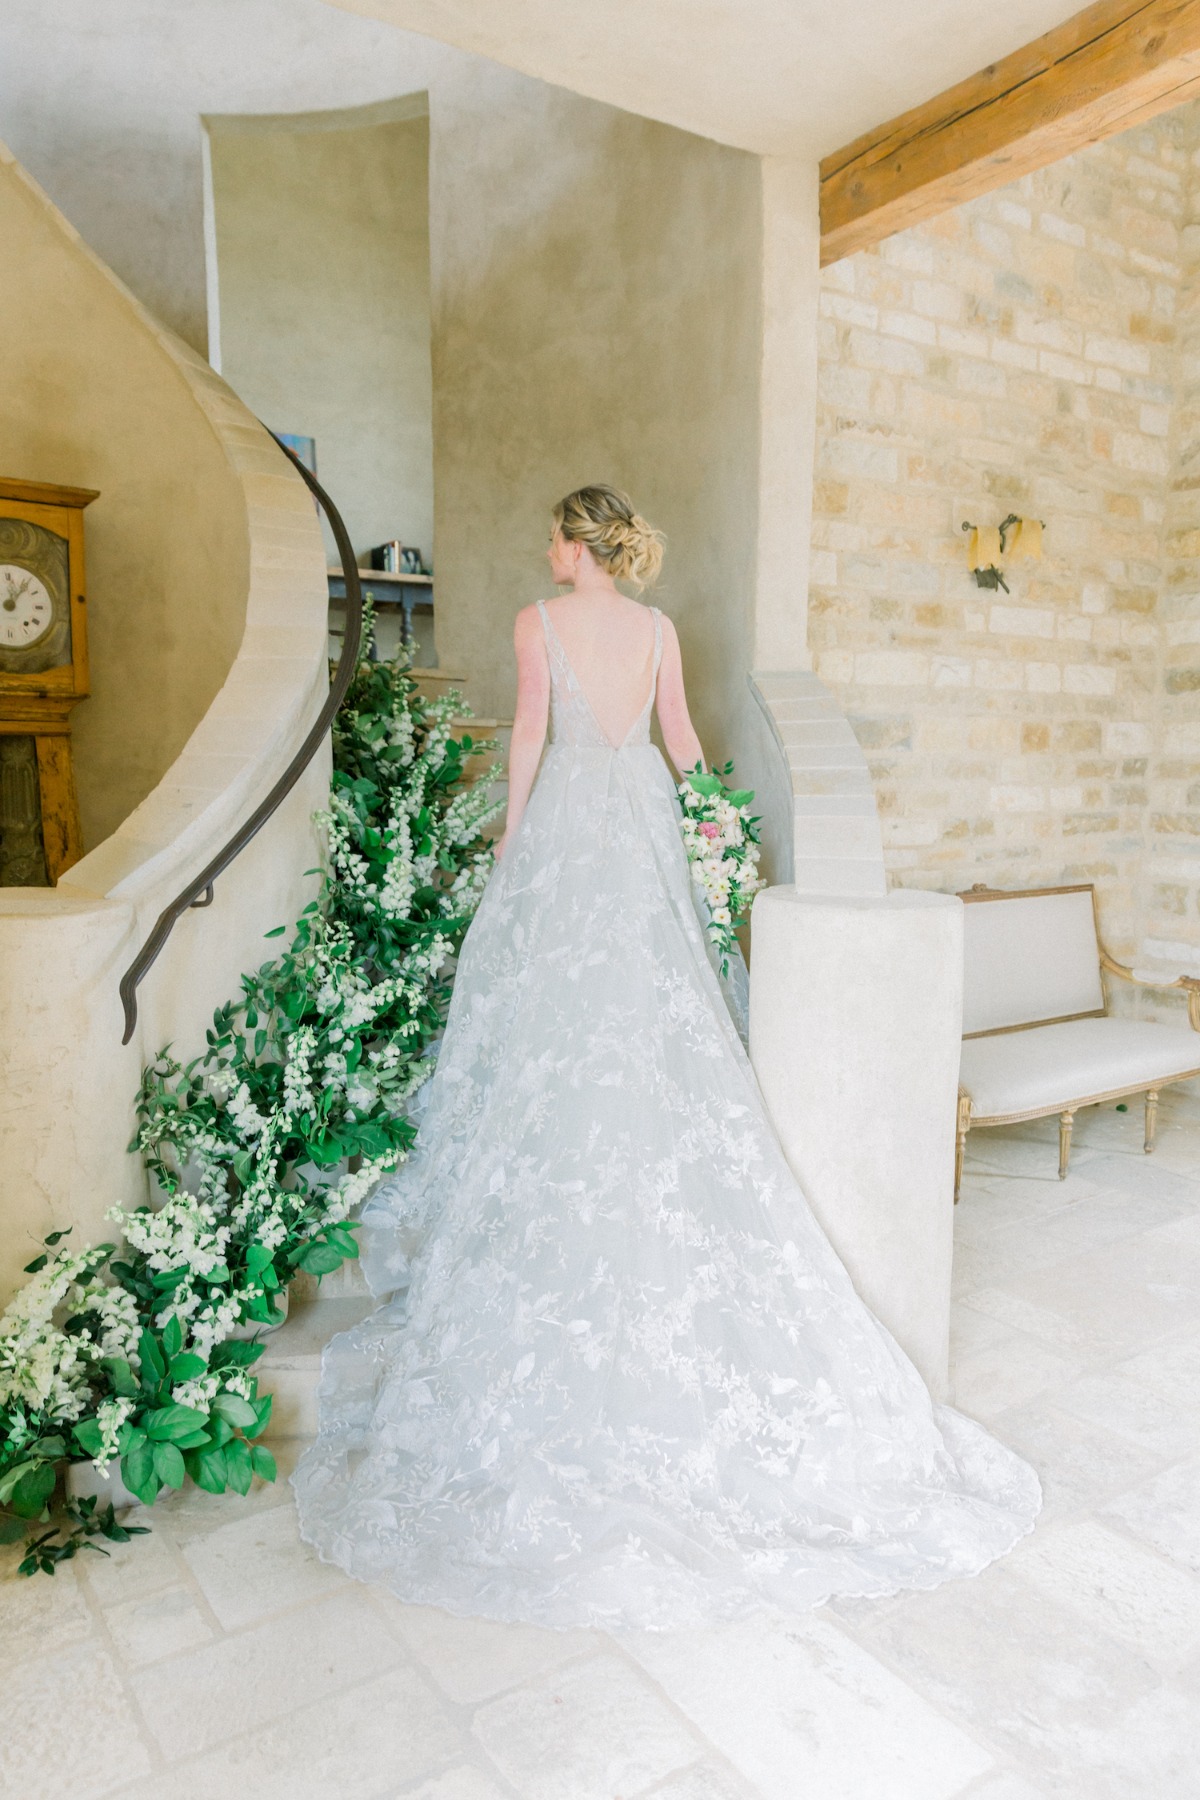 Hailey Paige Bridal wedding gown walking up staircase at Sunstone Villa